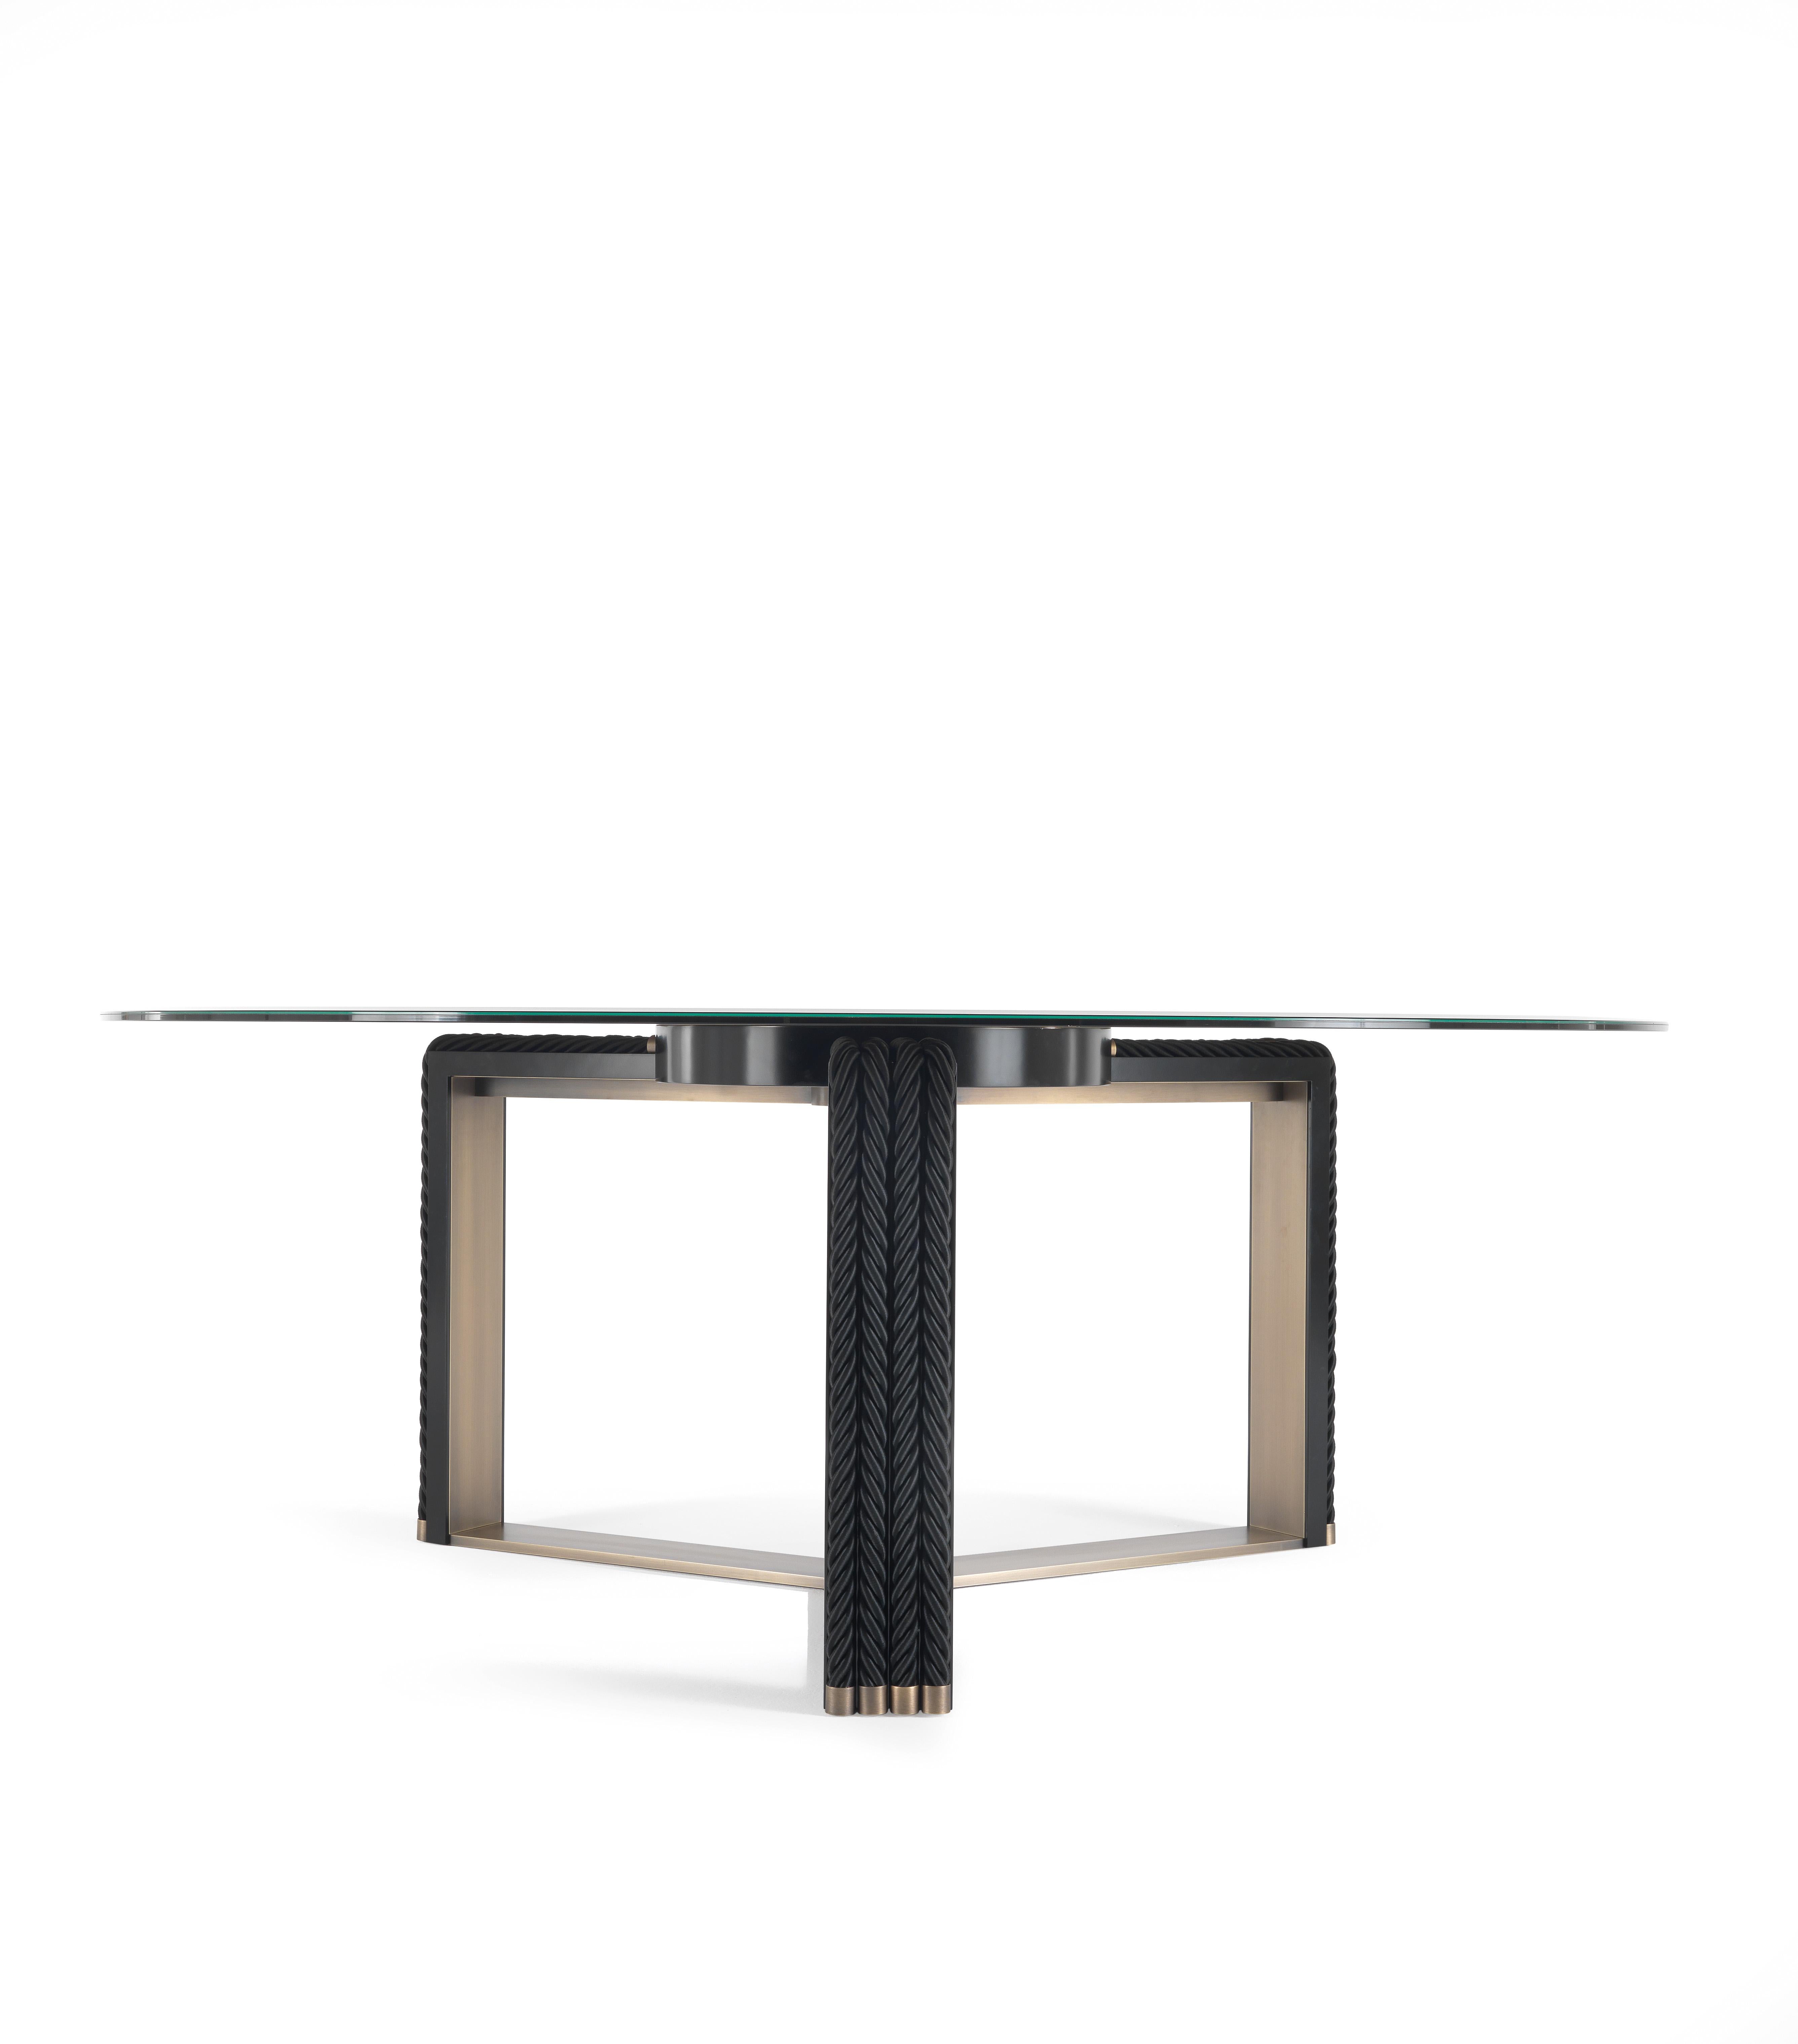 Protagonist of the dining room, the imposing Glasgow table has a coupled and ground bronzed glass top, anchored to a brass disc and equipped with a removable lazy susan. The unique base in bronzed brass consists of a single piece structured on three